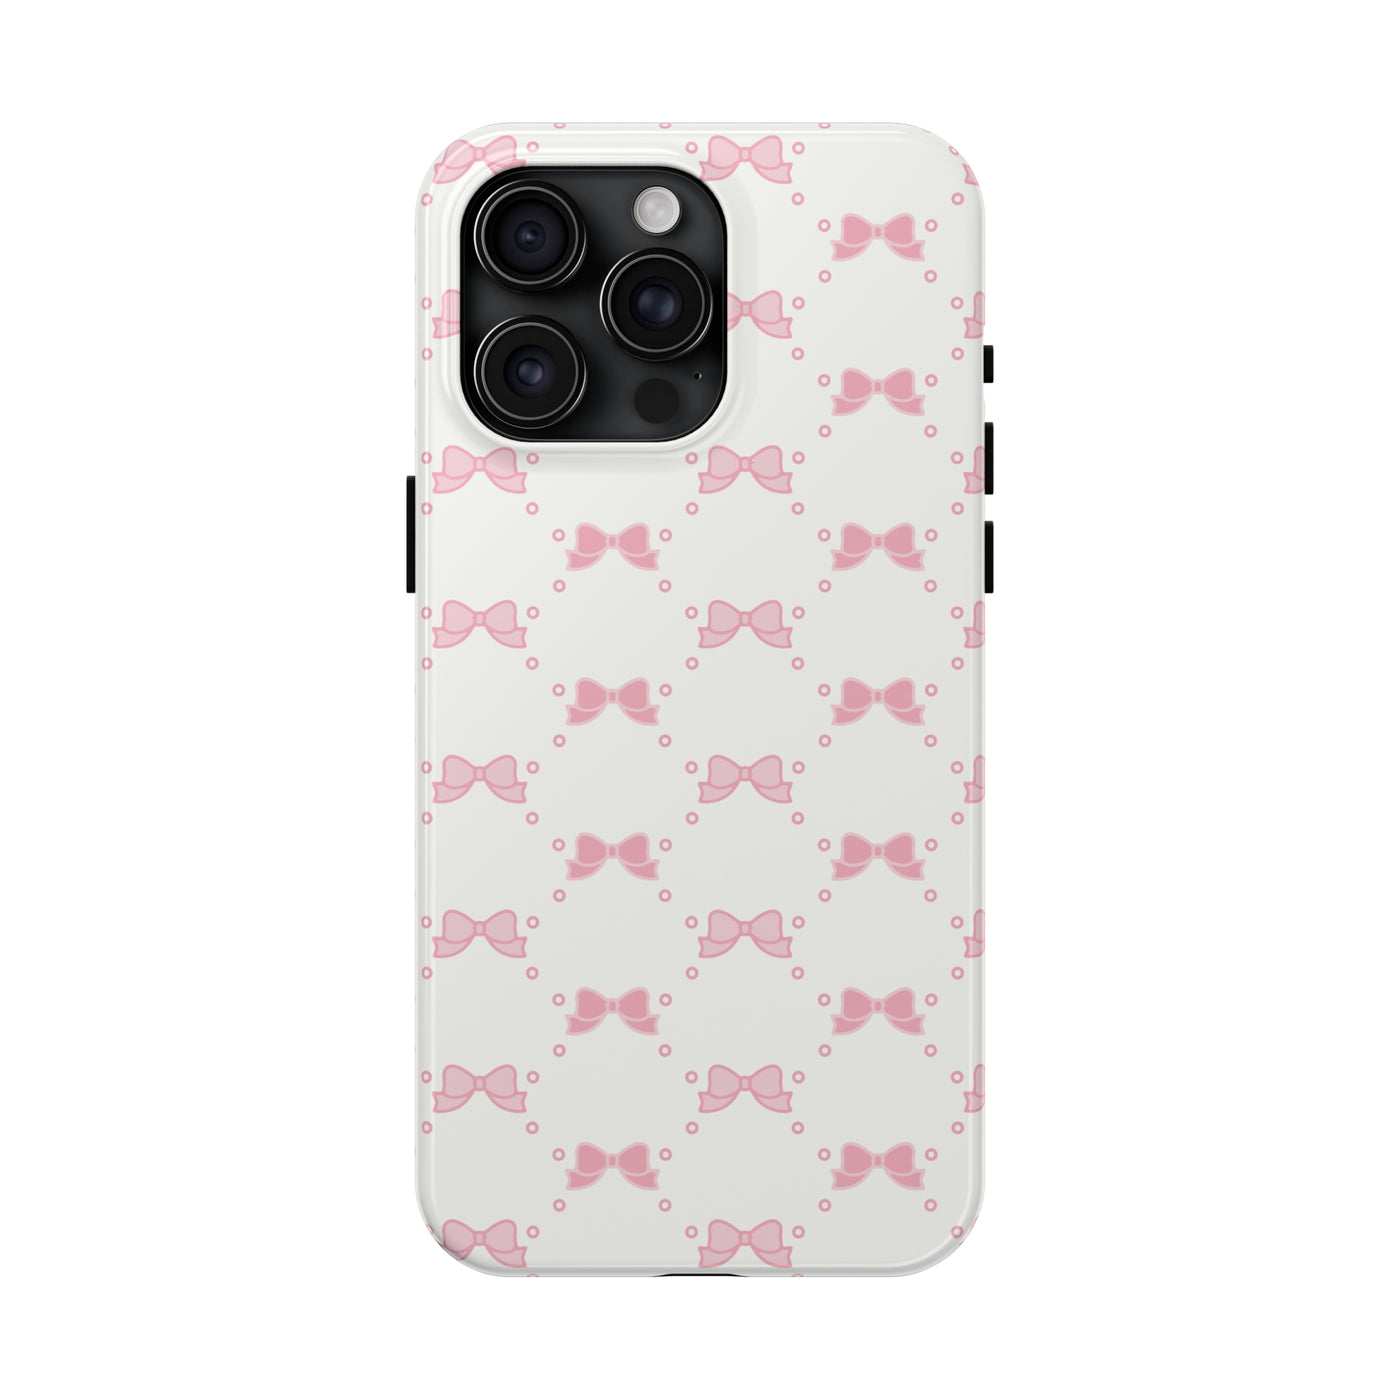 Pink Bow Phone Case, Bed Party Bow Iphone case, Bow Phone Case, College Case, Bow Gift - Bow Aesthetic, Pink Bow, Coquette Aesthetic,